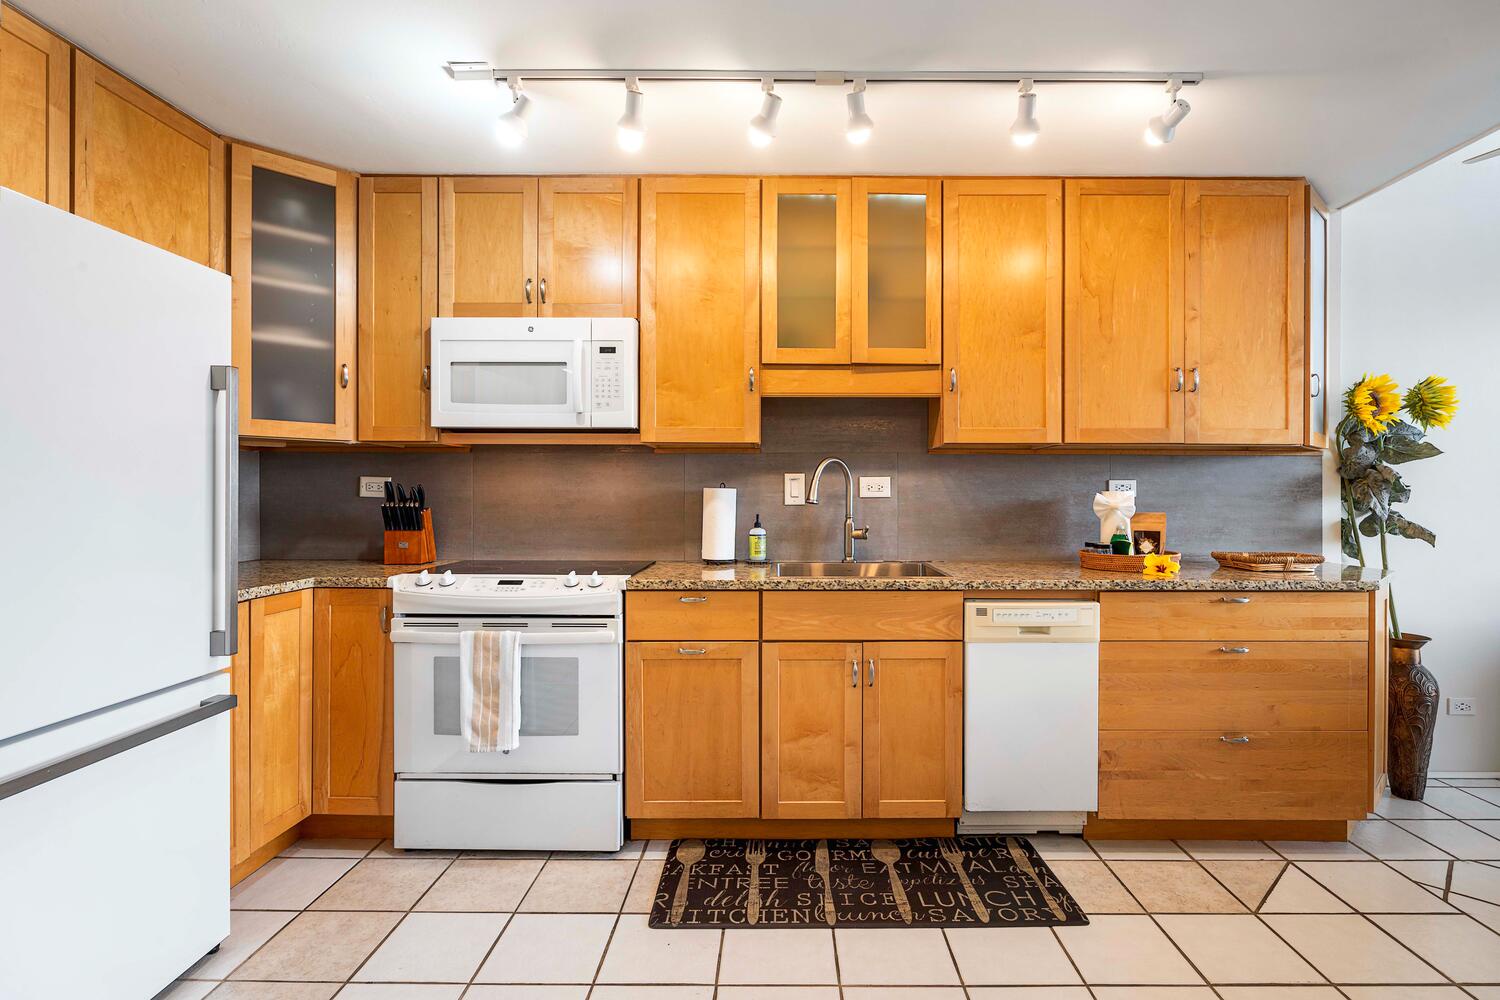 Kailua Kona Vacation Rentals, Kona Alii 512 - Equipped with appliances and wooden cabinetry, just all you need to prep meals.